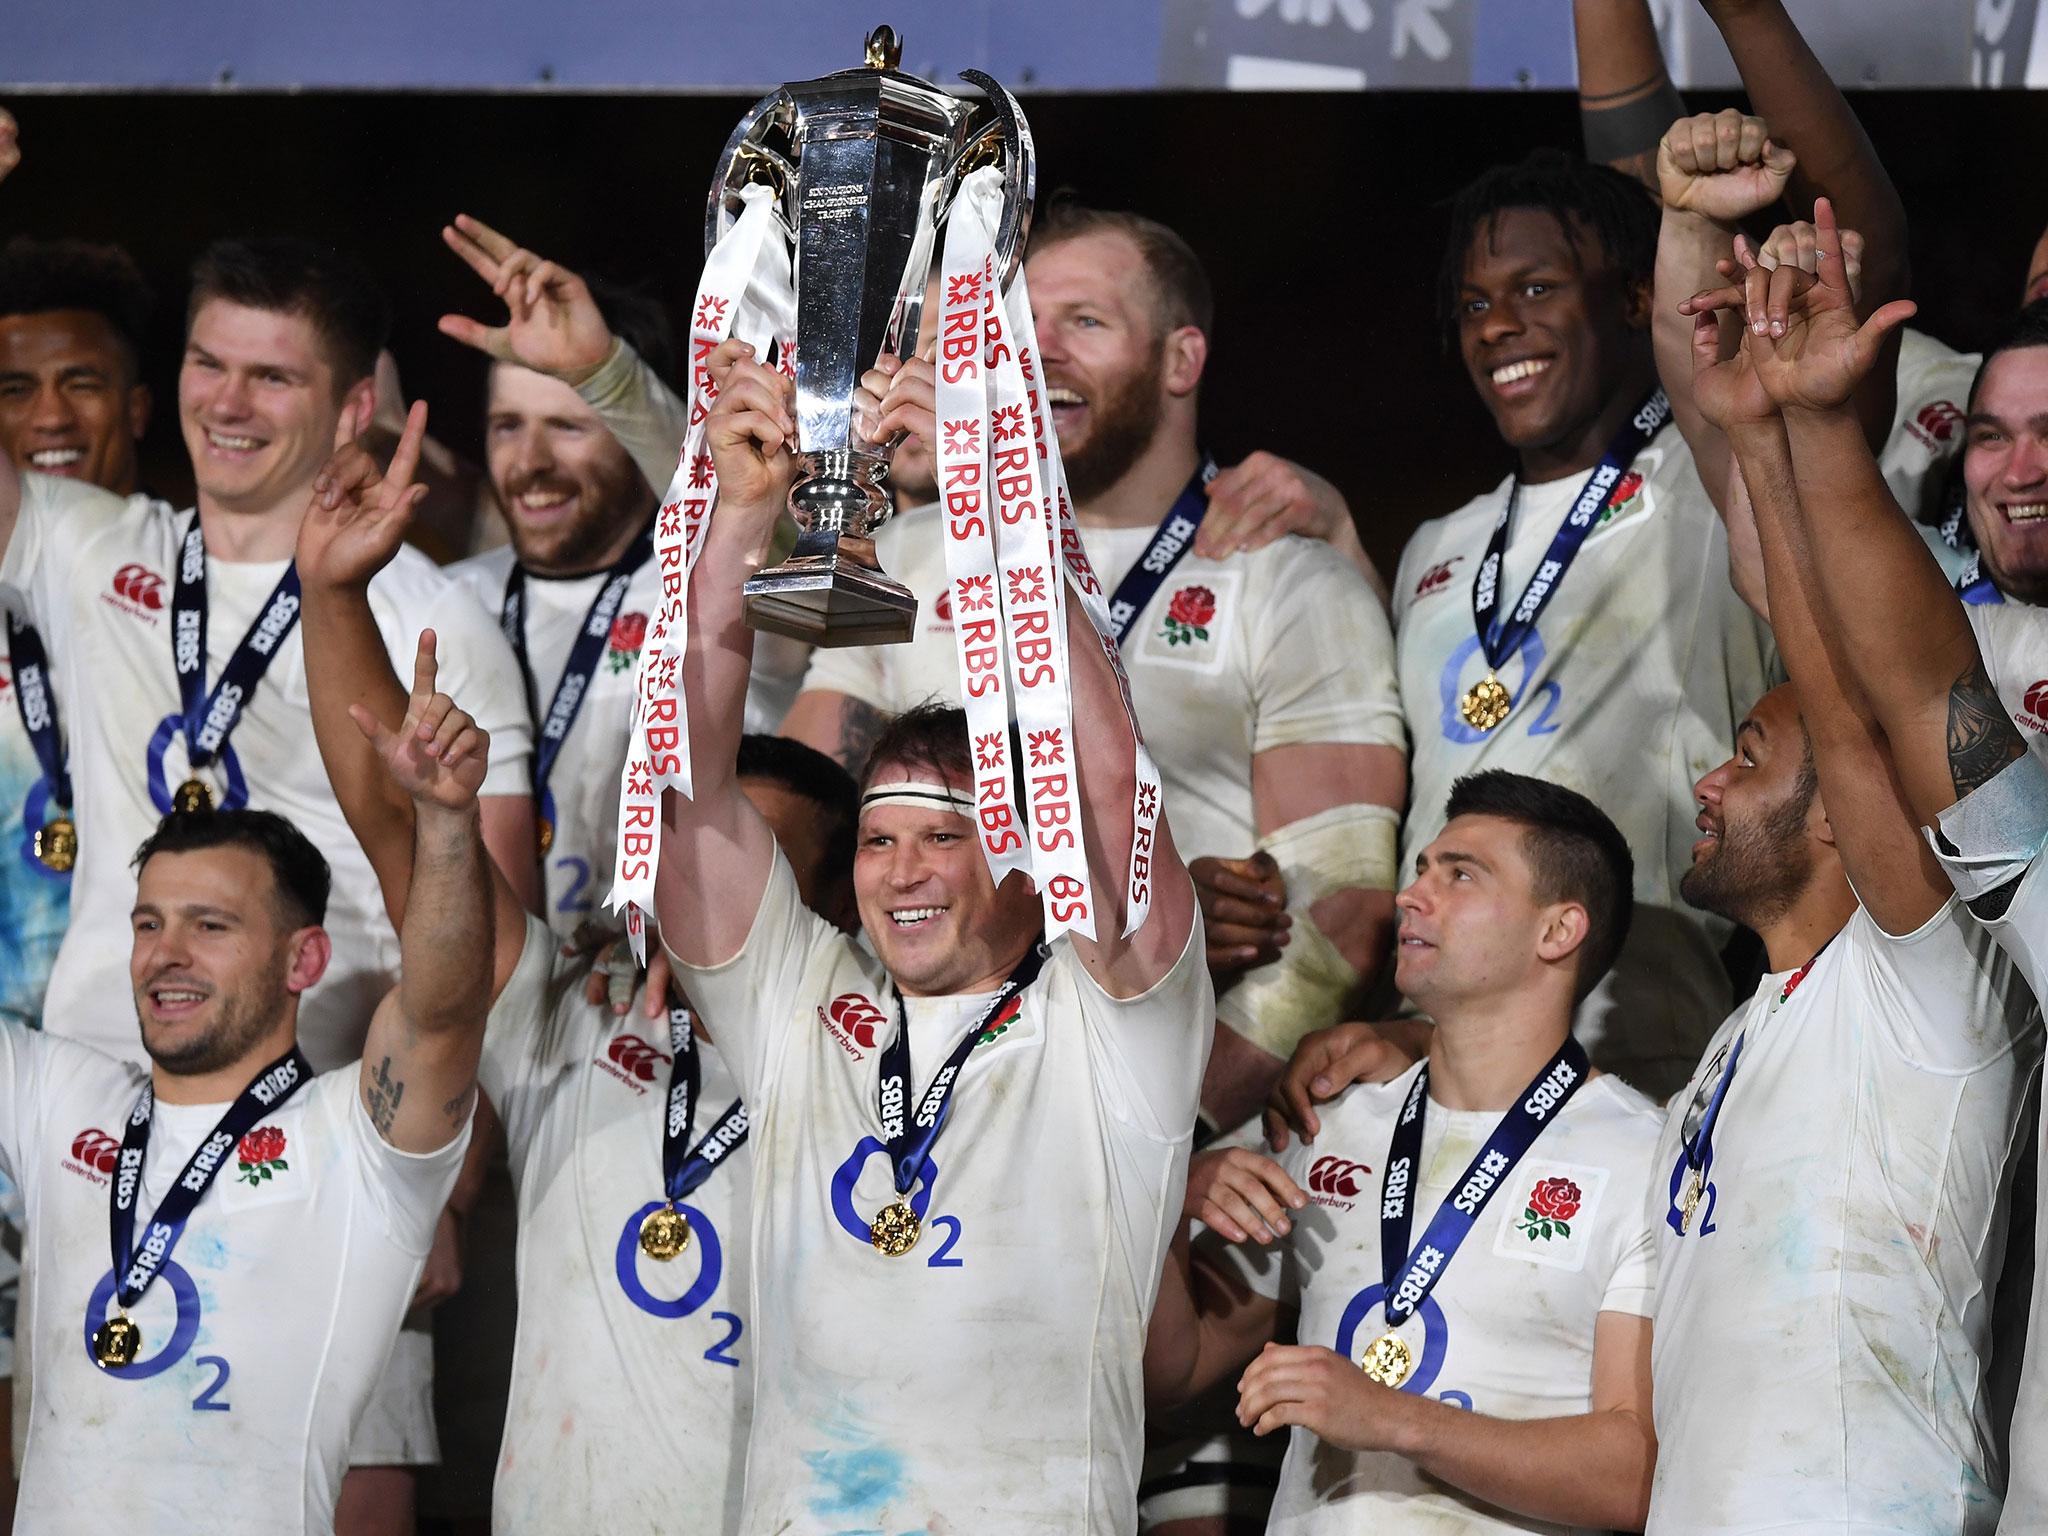 England retained their Six Nations title earlier this year